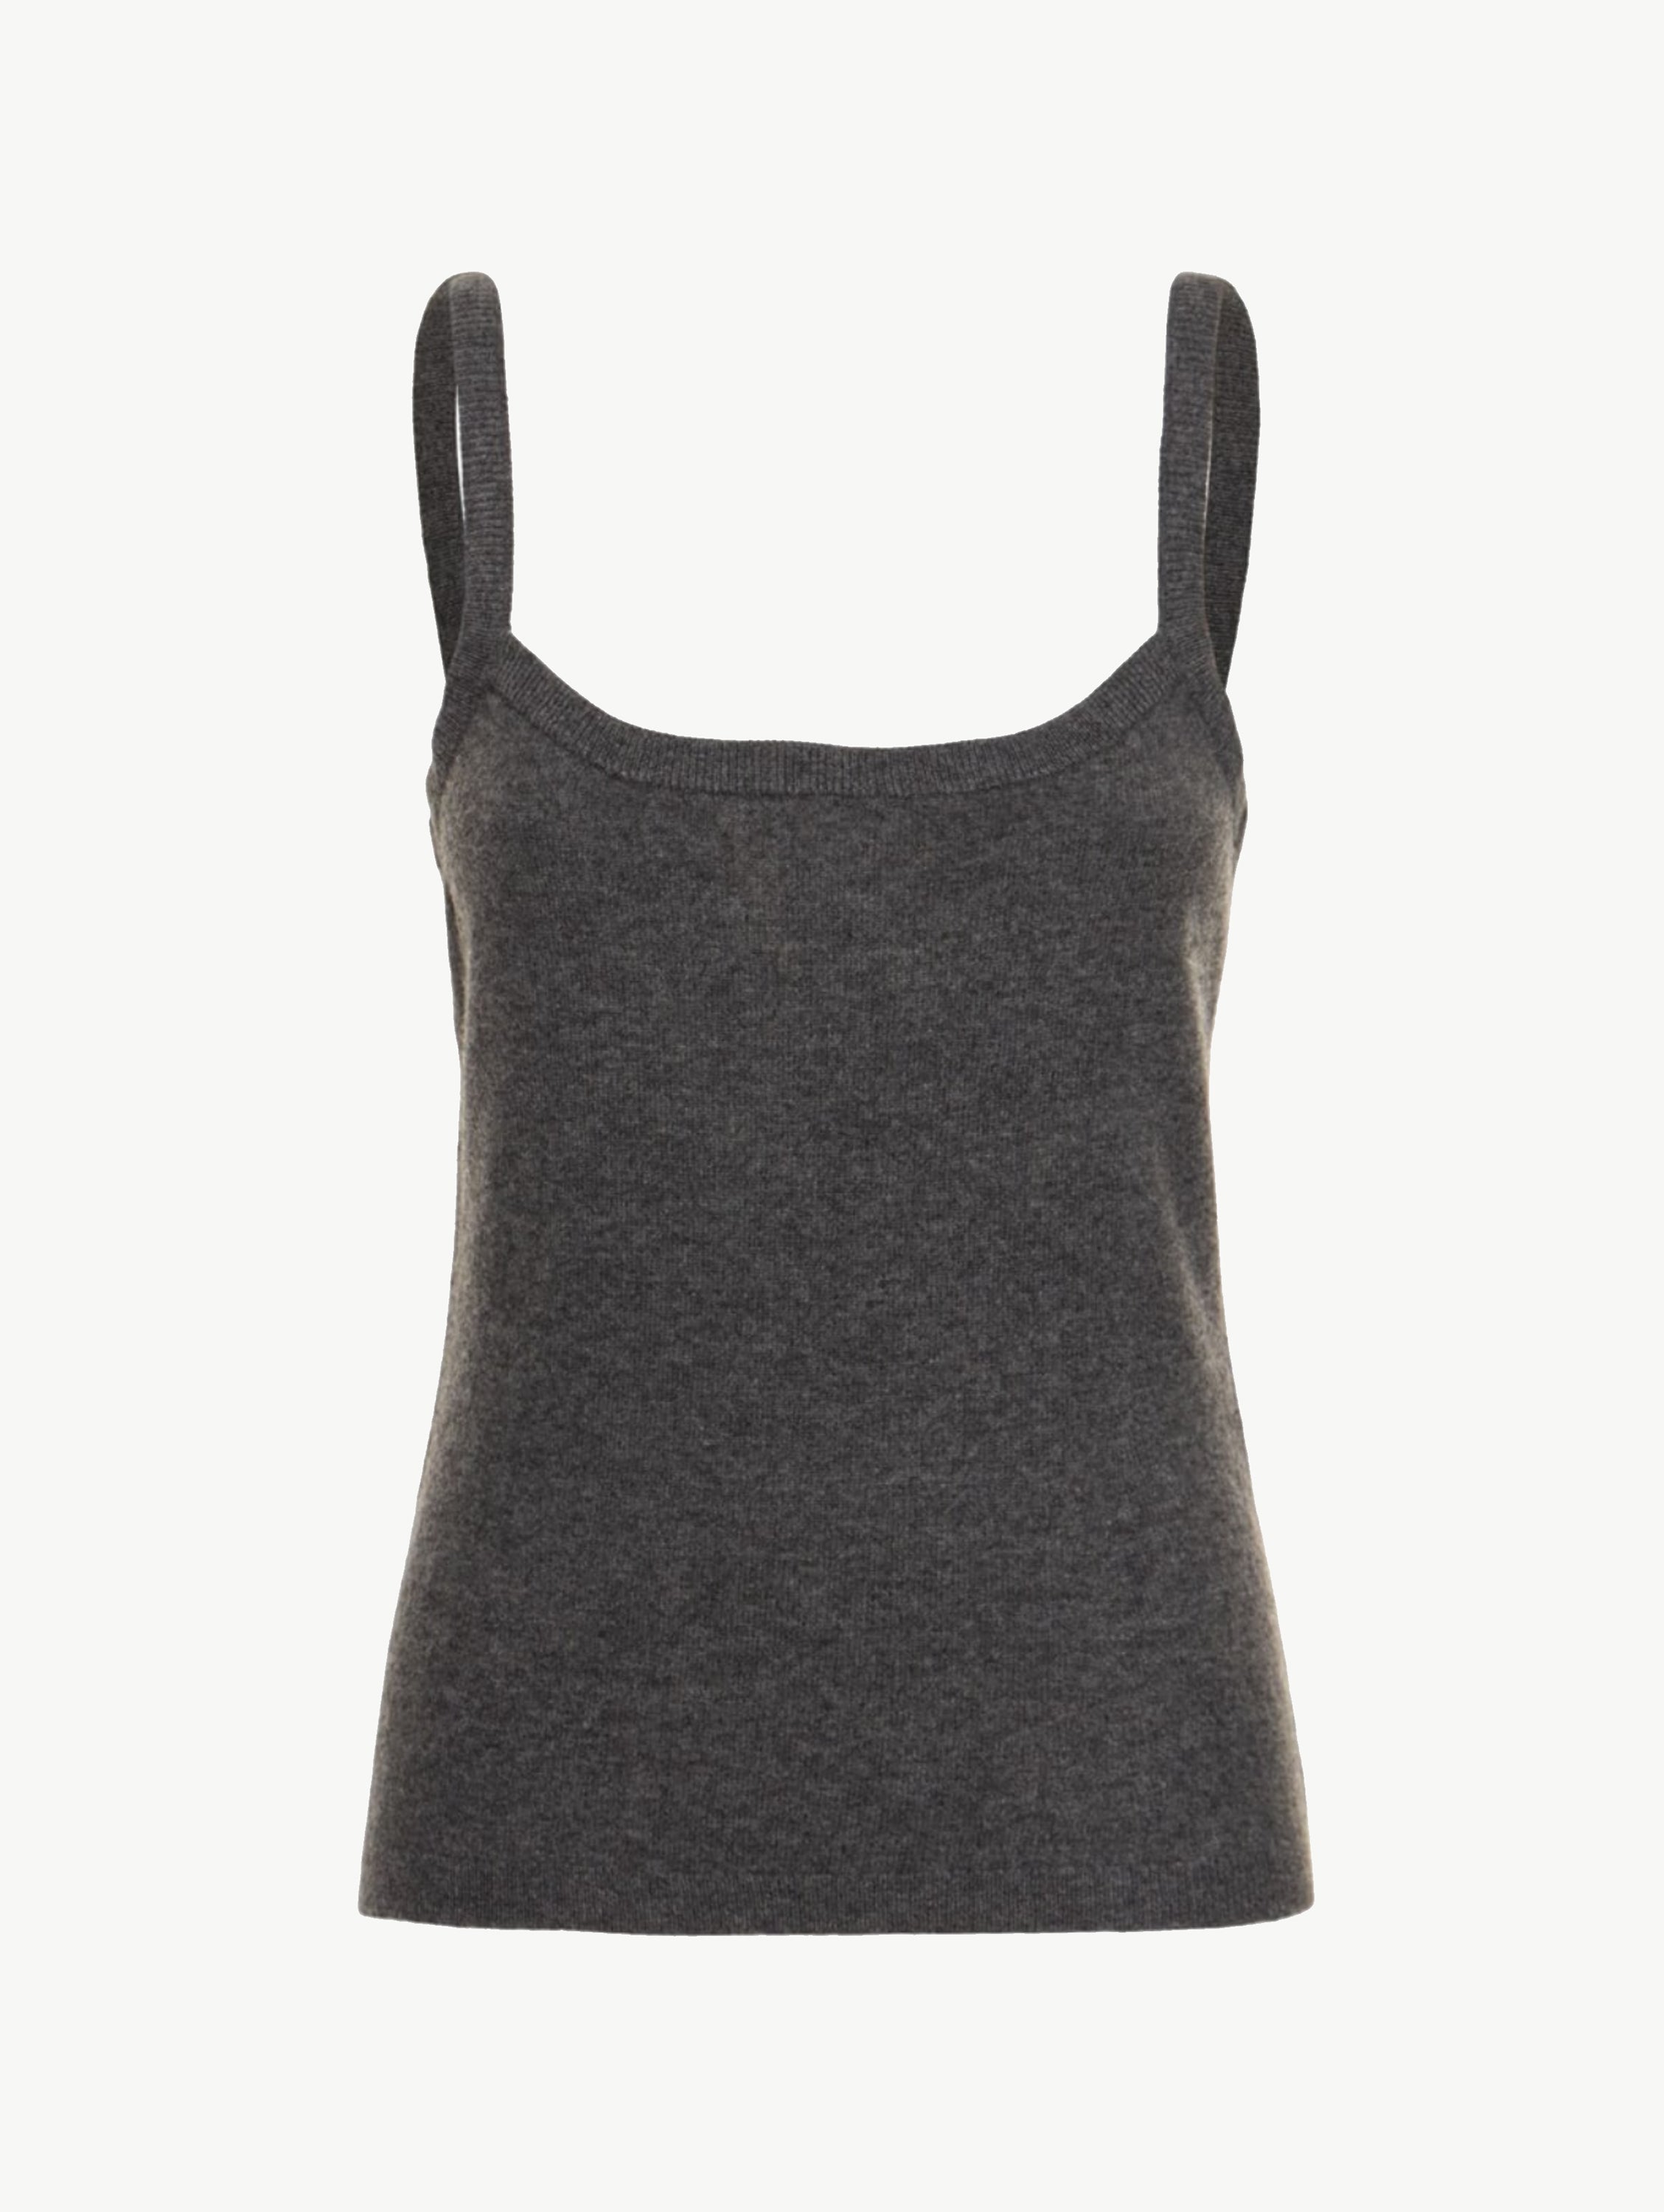 Wool blend camisole top